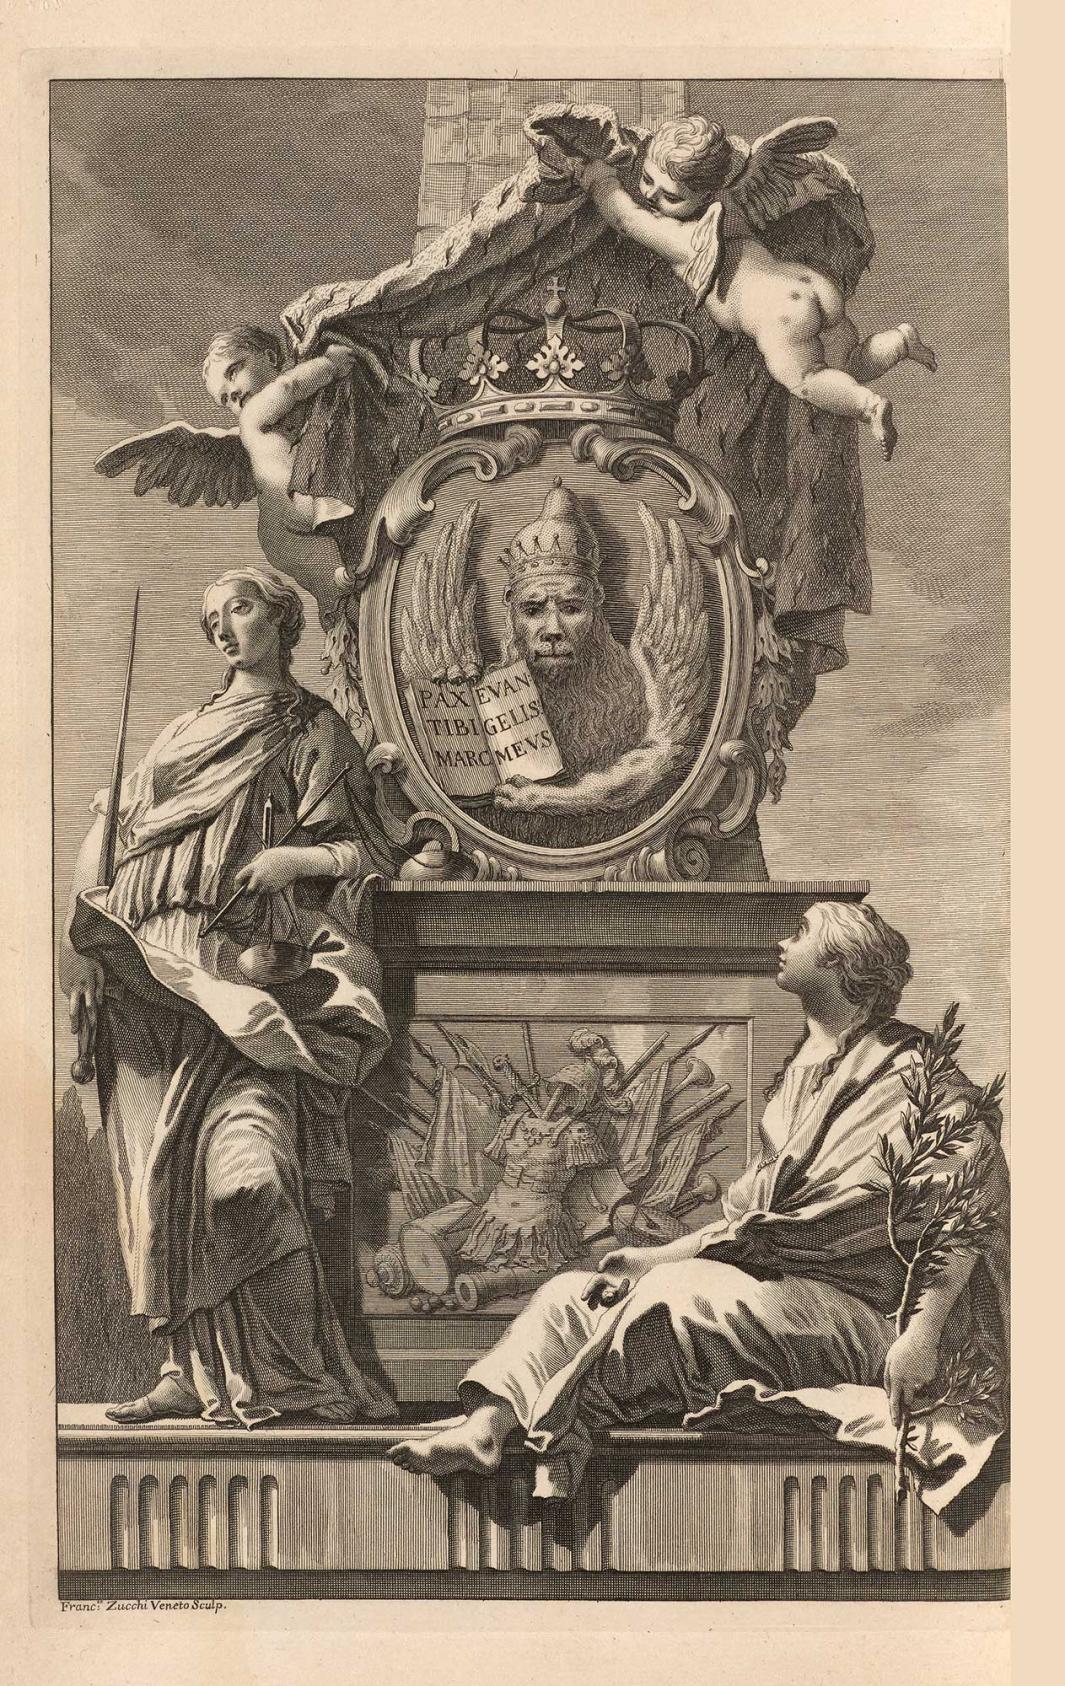 A print depicting two allegorical female figures, one seated and one standing, adjacent a monument to Saint Mark.